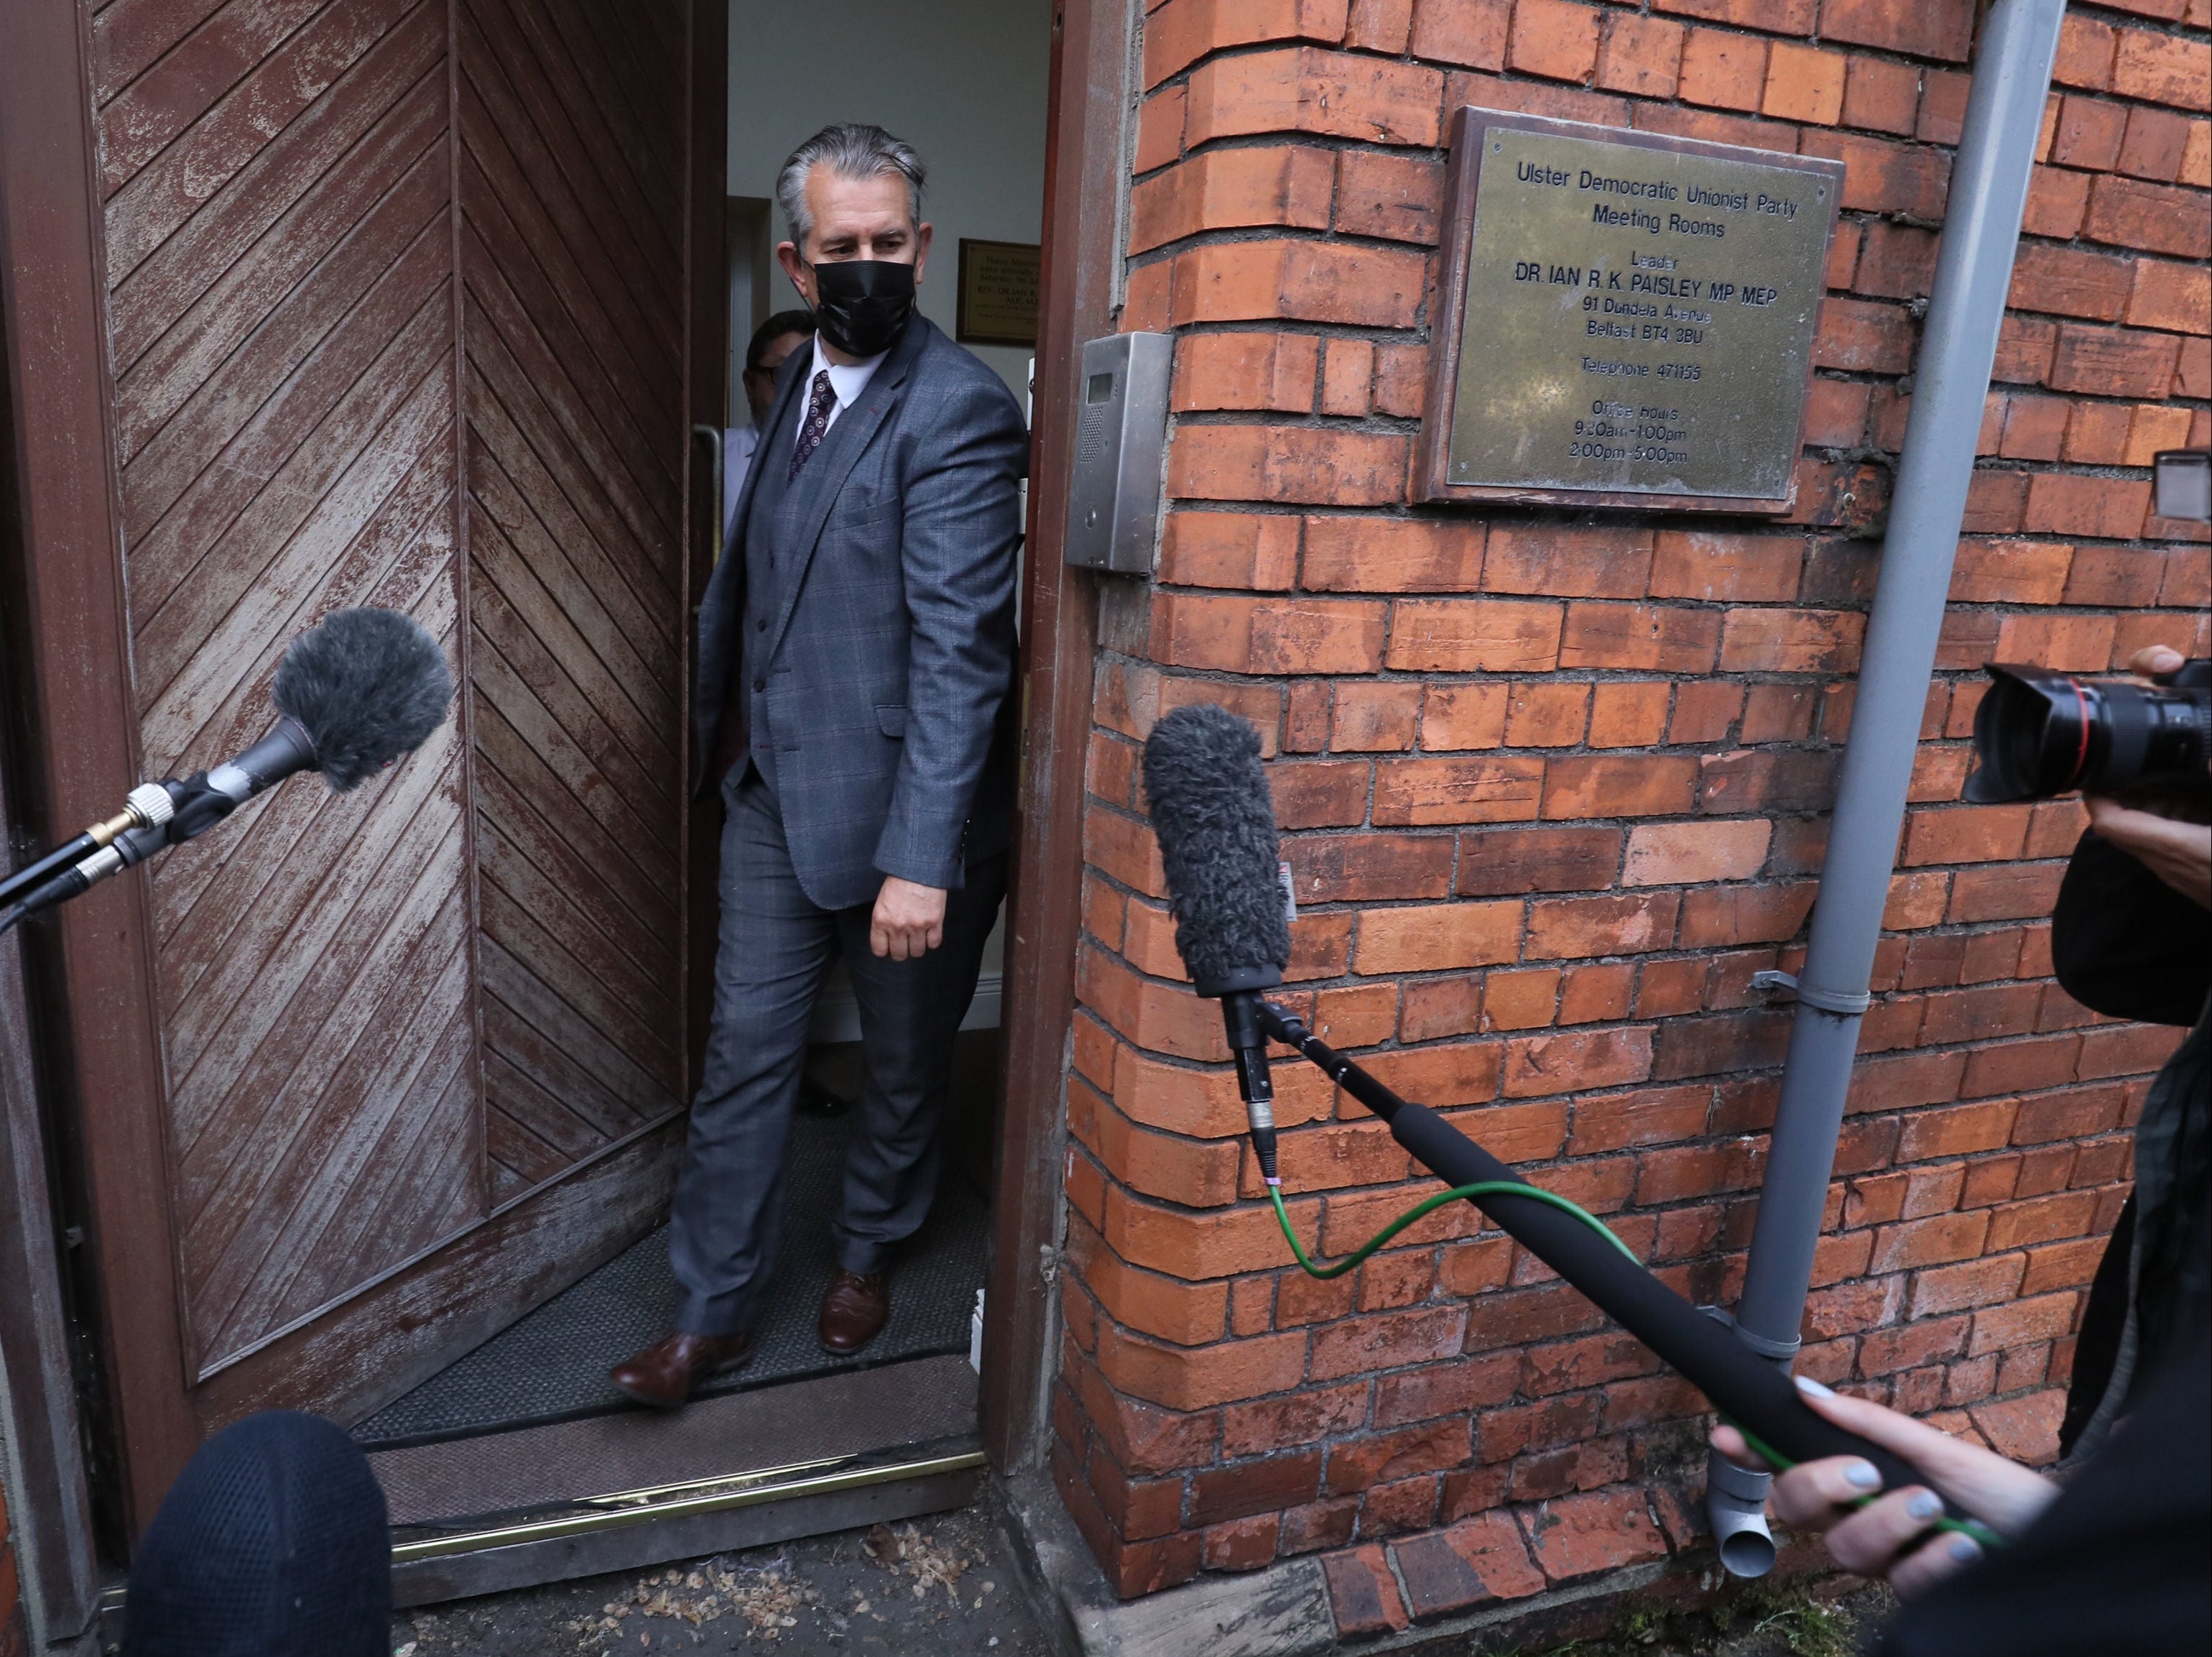 Edwin Poots leaves the DUP headquarters in Belfast on Thursday, prior to standing down as the party leader following an internal party revolt against him